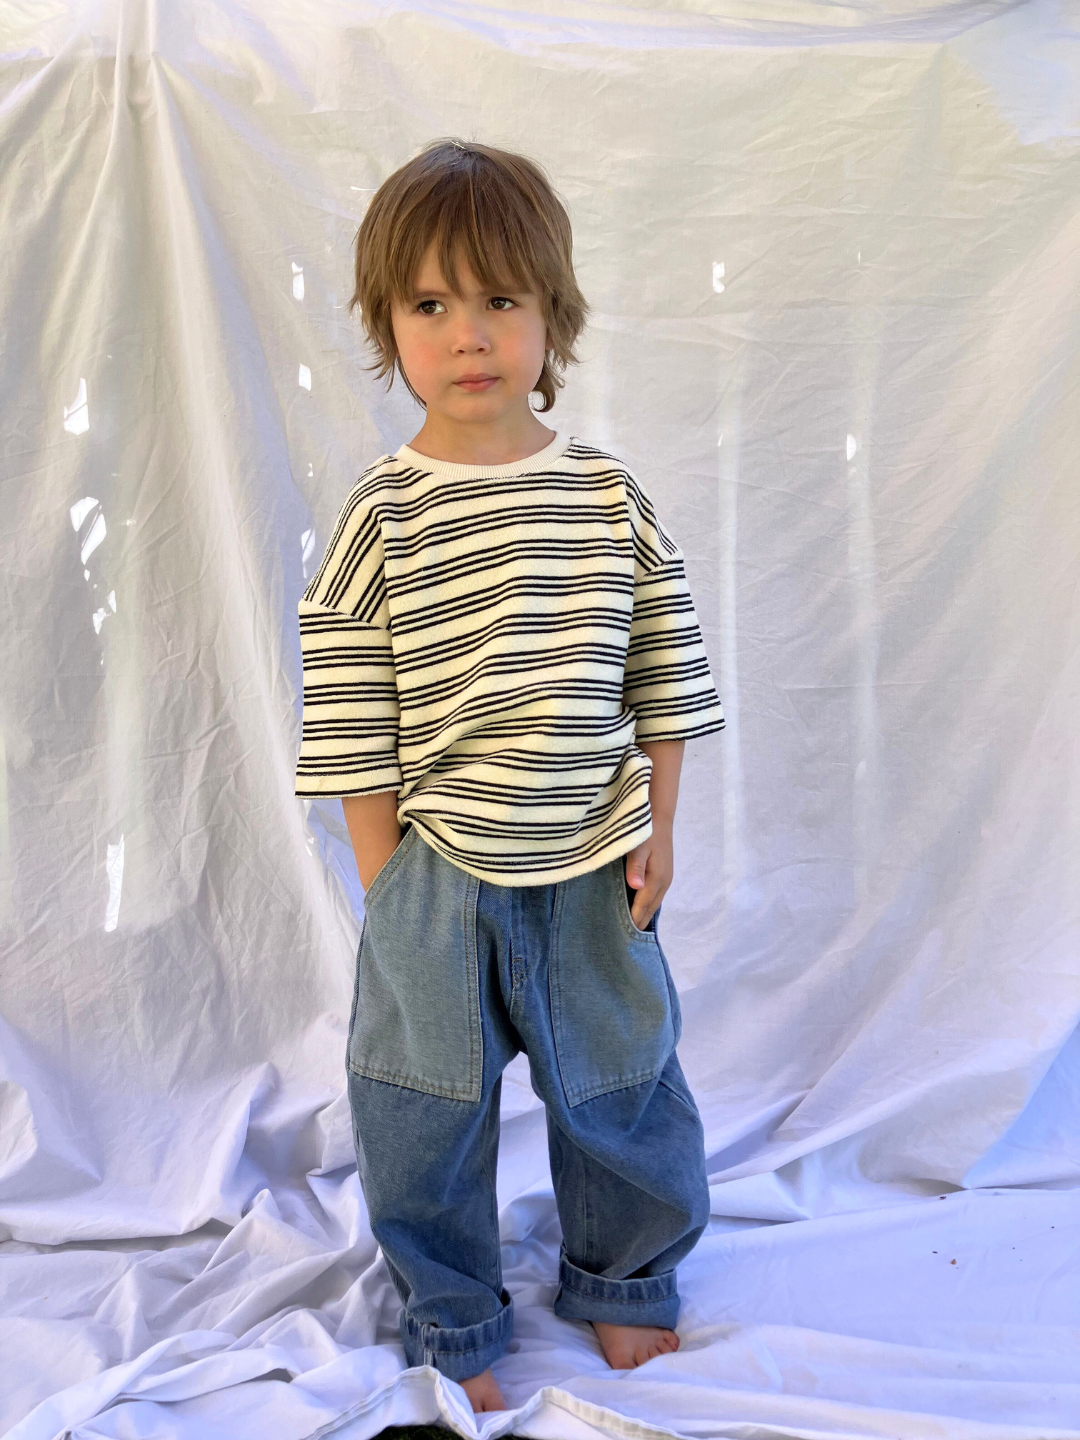 A child wearing the Double Trouble baggy jeans in medium-blue denim with two large patch pockets of lighter denim. He wears an oversized striped t-shirt in cream, with black stripes, and stands in front of a white sheet.